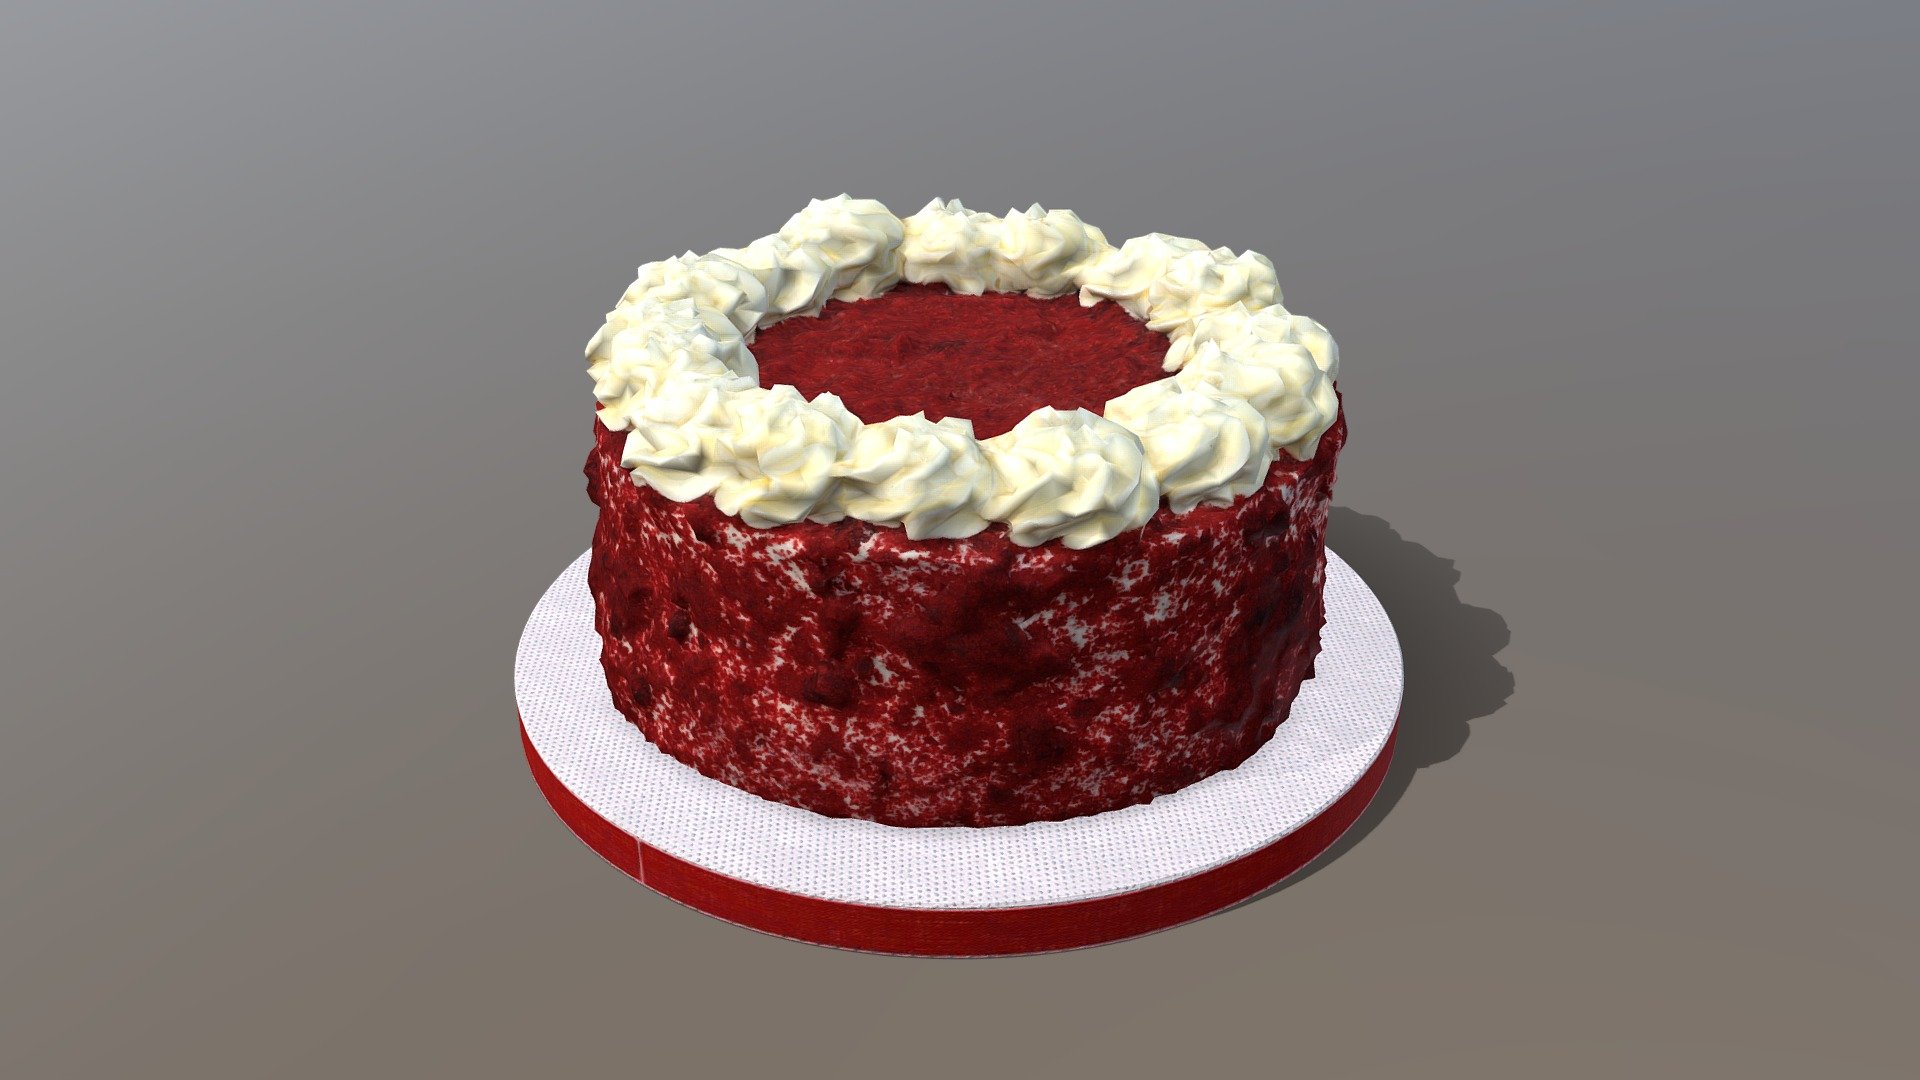 This premium Red Velvet Cake model was created using photogrammetry which is made by CAKESBURG Premium Cake Shop in the UK. You can purchase real cake from this link: https://cakesburg.co.uk/products/red-velvet-buttercream-cake?_pos=2&amp;_sid=a9ff9af21&amp;_ss=r

Textures 4096*4096px PBR photoscan-based materials Base Color, Normal, Roughness, Specular) - Red Velvet Cake - 3D model by Cakesburg Premium 3D Cake Shop (@Viscom_Cakesburg) 3d model